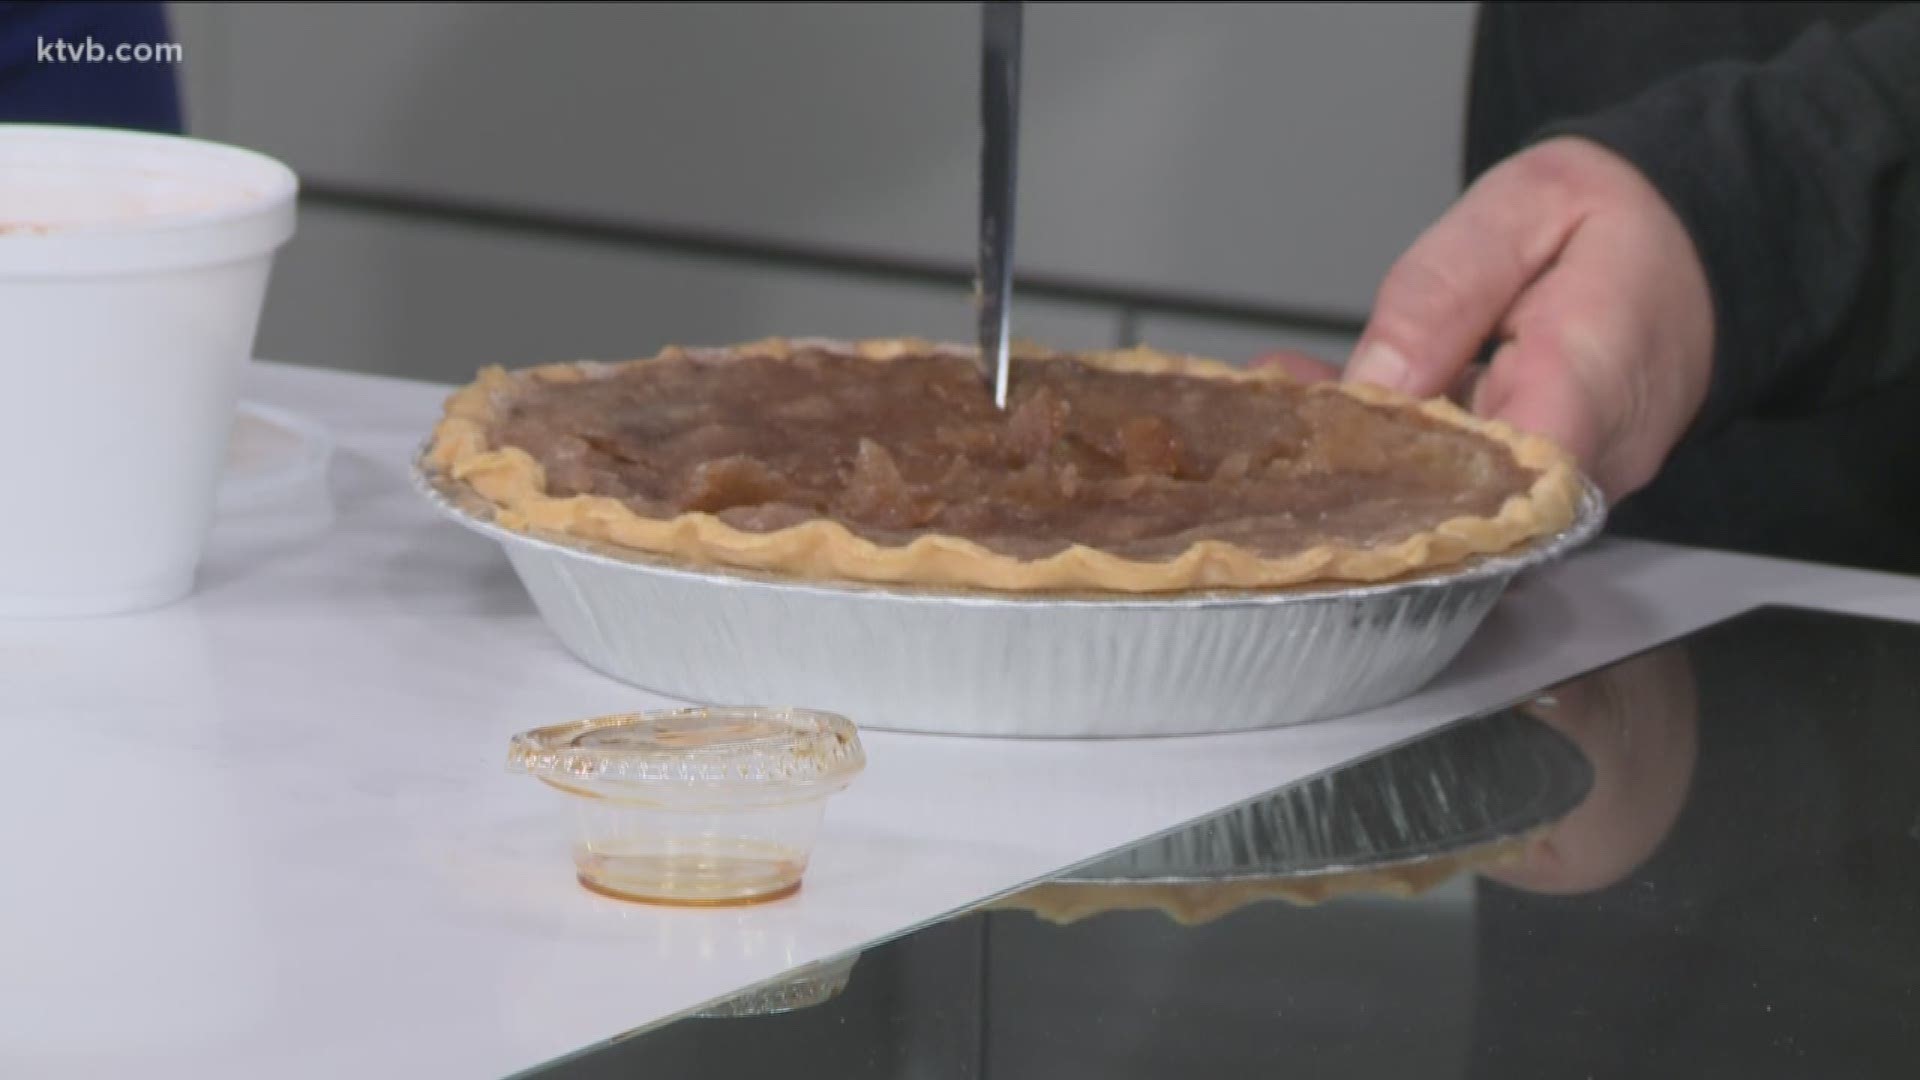 Bridgette McAbee from Boise Pie Co. and Eatery stops by the KTVB kitchen to show us how to make their Sugar Cream Pie.